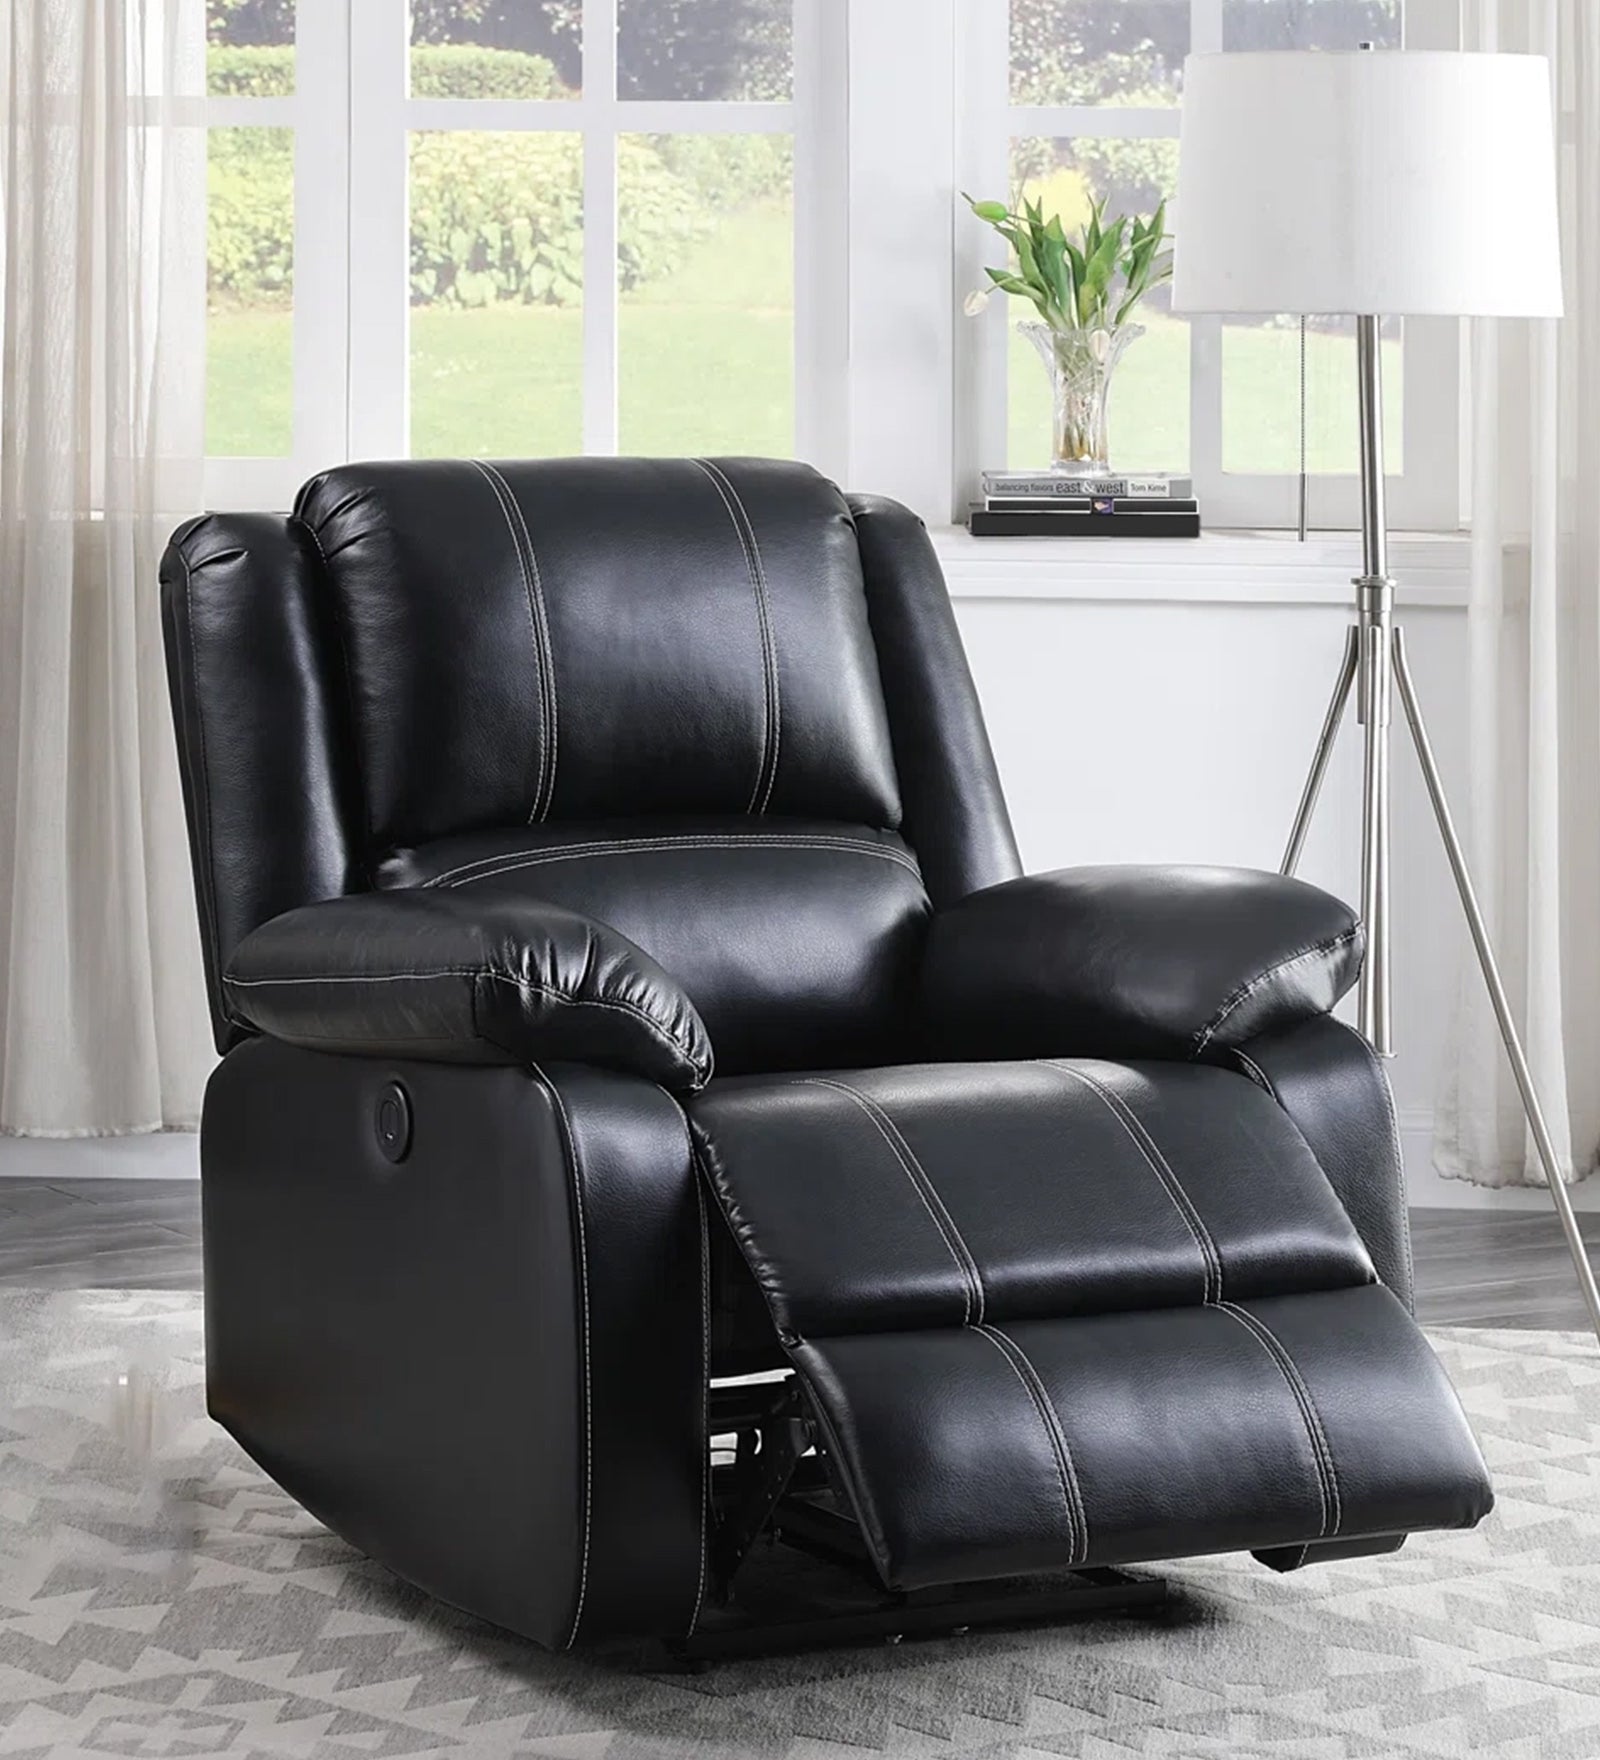 Santo Leather Motorized 1 Seater Recliner In Dark Black Leather Finish